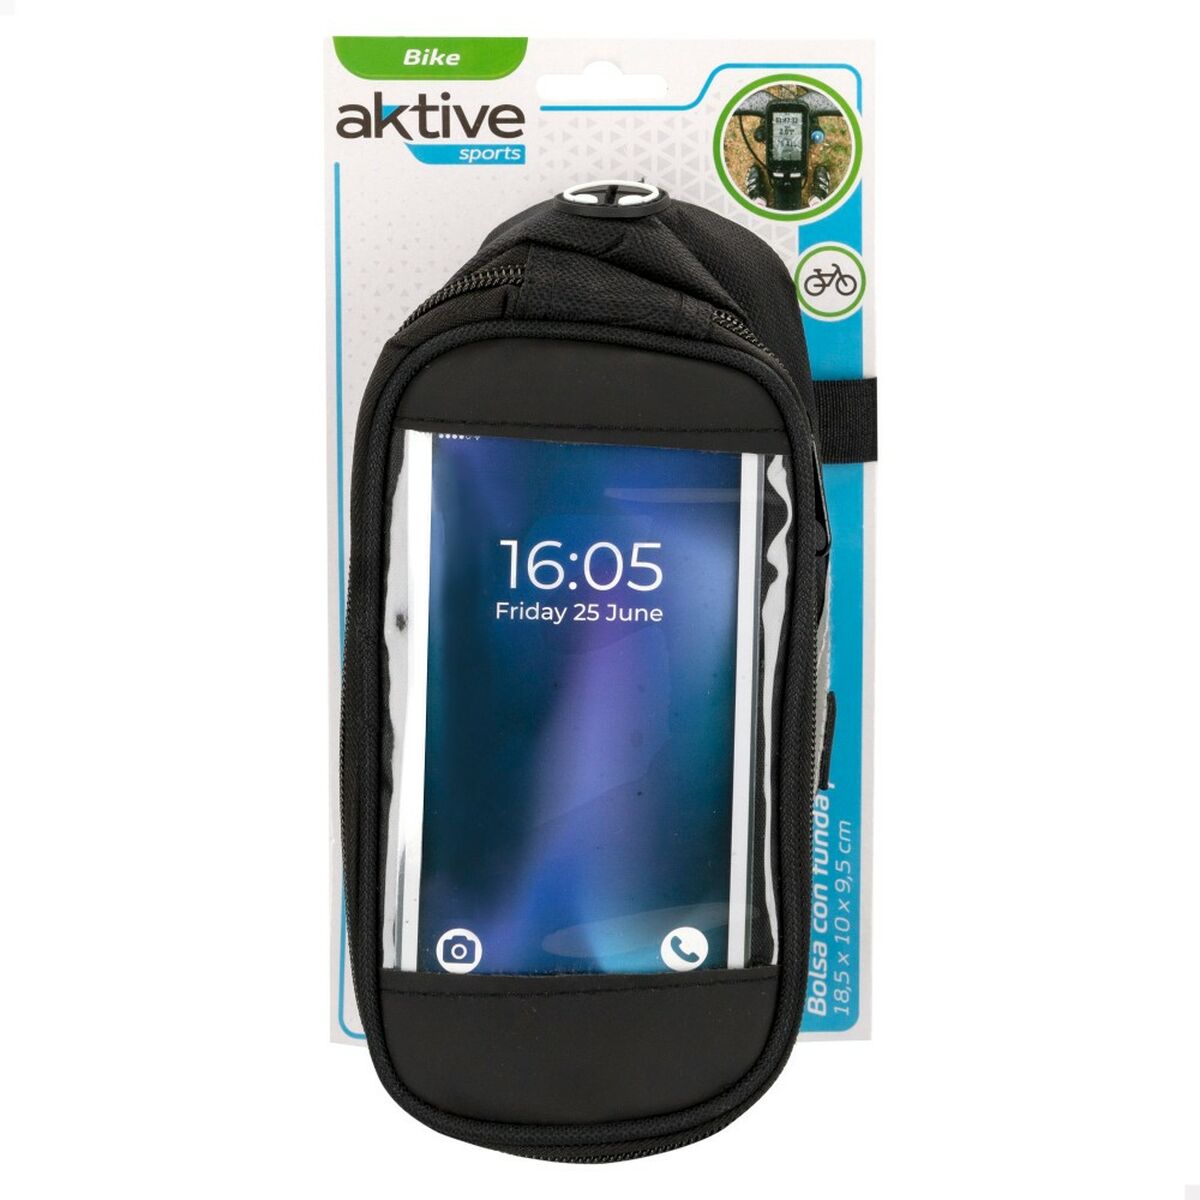 Mobile support Aktive Bicycle